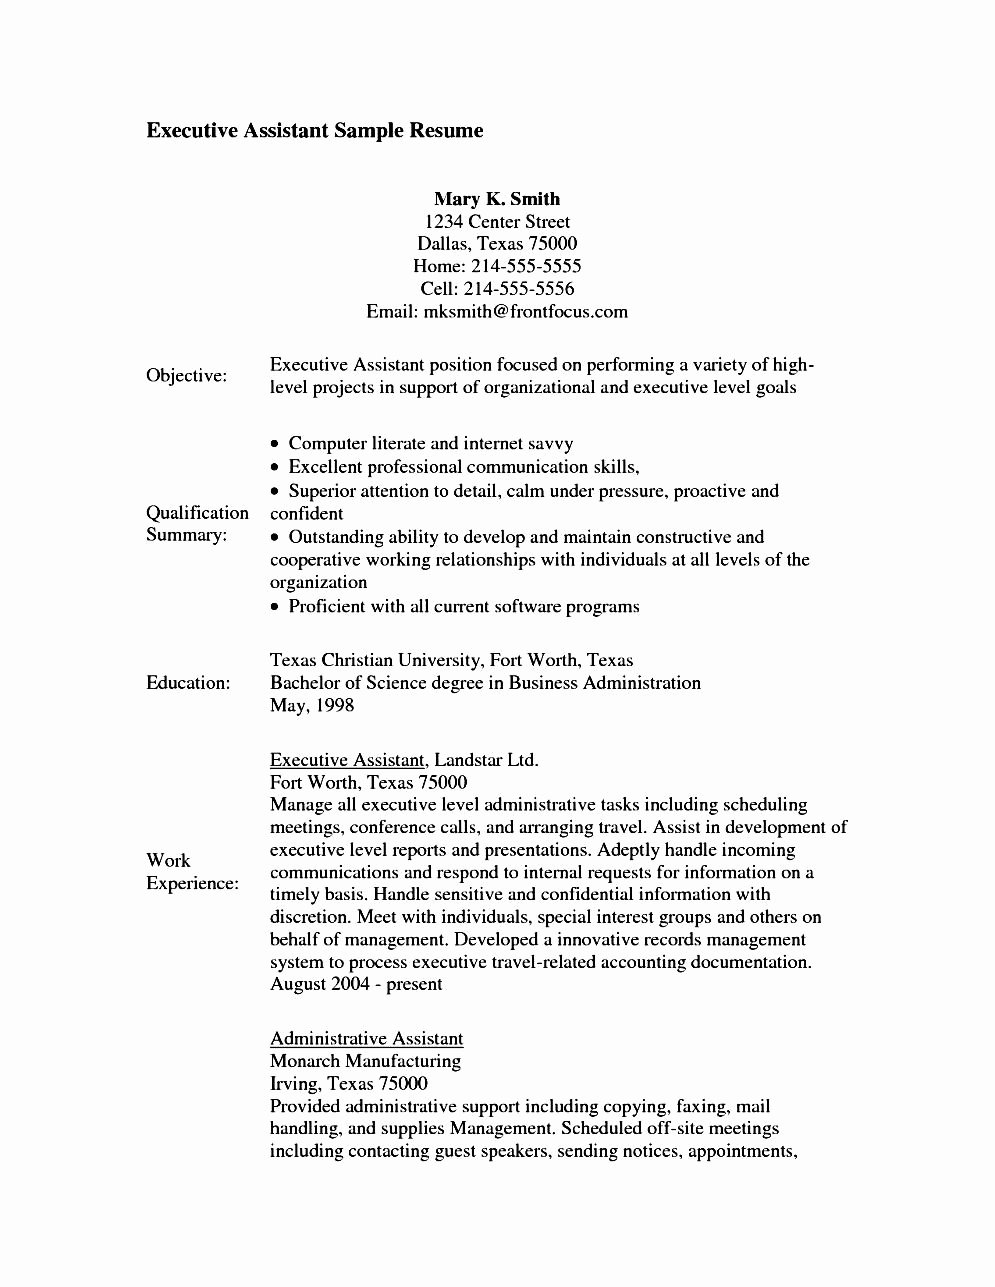 Executive assistant Resume Objective Free Samples